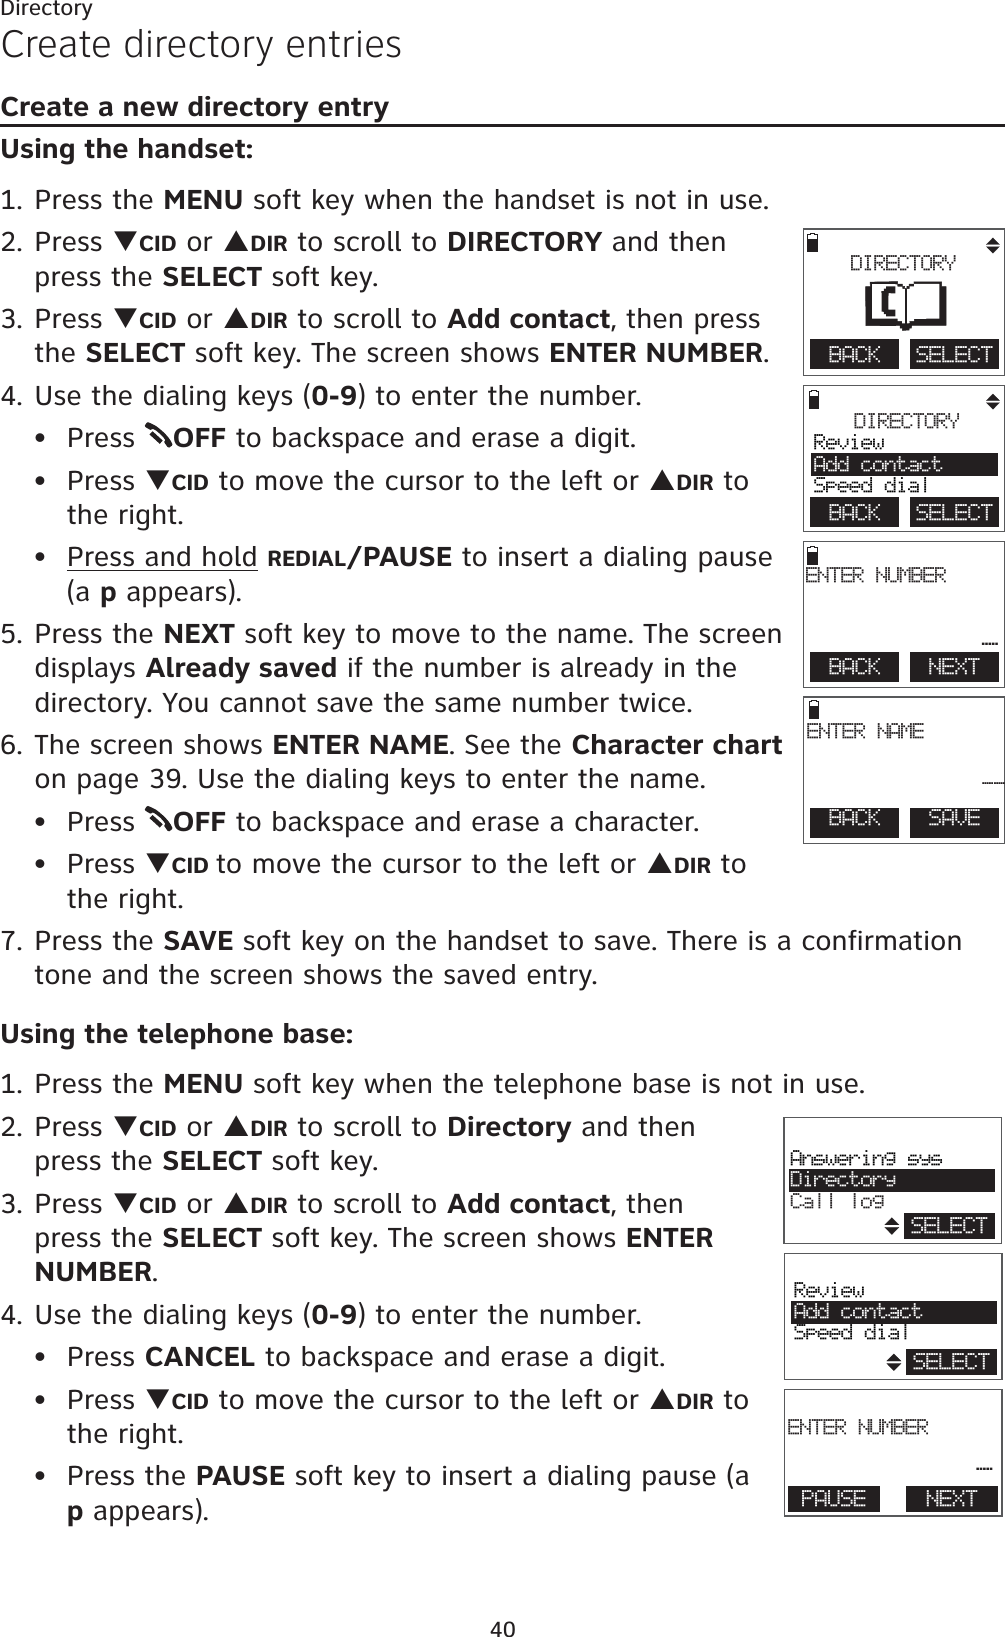 40DirectoryCreate directory entriesCreate a new directory entryUsing the handset:1. Press the MENU soft key when the handset is not in use.2. Press TCID or SDIR to scroll to DIRECTORY and then press the SELECT soft key.3. Press TCID or SDIR to scroll to Add contact, then press the SELECT soft key. The screen shows ENTER NUMBER.4. Use the dialing keys (0-9) to enter the number.Press  OFF to backspace and erase a digit.Press TCID to move the cursor to the left or SDIR to the right.Press and hold REDIAL/PAUSE to insert a dialing pause (a p appears).5. Press the NEXT soft key to move to the name. The screen displays Already saved if the number is already in the directory. You cannot save the same number twice. 6. The screen shows ENTER NAME. See the Character charton page 39. Use the dialing keys to enter the name.Press  OFF to backspace and erase a character.Press TCID to move the cursor to the left or SDIR to the right.7. Press the SAVE soft key on the handset to save. There is a confirmation tone and the screen shows the saved entry.Using the telephone base:1. Press the MENU soft key when the telephone base is not in use.2. Press TCID or SDIR to scroll to Directory and then press the SELECT soft key.3. Press TCID or SDIR to scroll to Add contact, then press the SELECT soft key. The screen shows ENTERNUMBER.4. Use the dialing keys (0-9) to enter the number.Press CANCEL to backspace and erase a digit.Press TCID to move the cursor to the left or SDIR to the right.Press the PAUSE soft key to insert a dialing pause (a p appears).••••••••DIRECTORYReviewAdd contactSpeed dialBACK    SELECTBACK    NEXTENTER NUMBER_BACK    SAVEENTER NAME__BACK    SELECTDIRECTORY                       Answering sysDirectoryCall logSELECT                       ReviewAdd contactSpeed dialSELECT                       ENTER NUMBER _ PAUSE NEXT